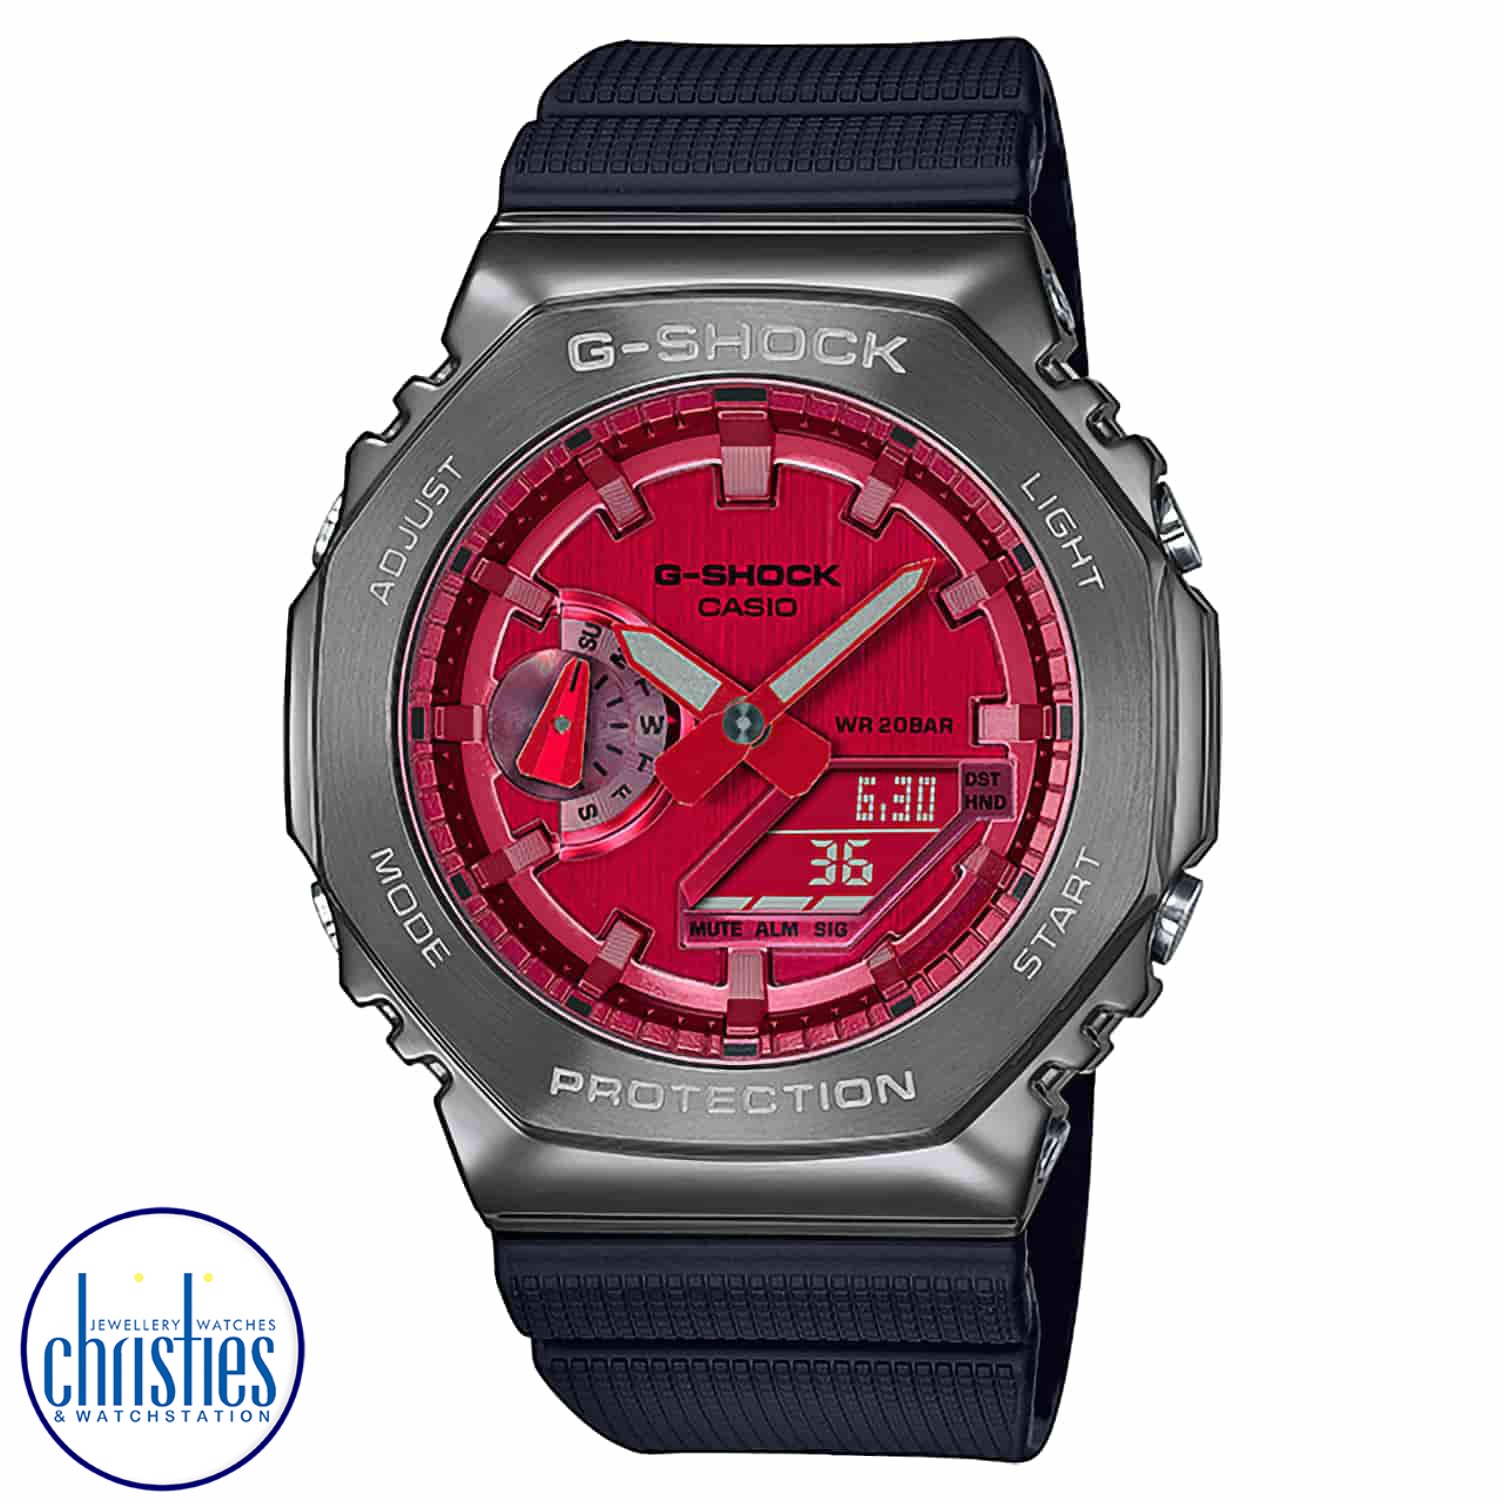 GM2100B-4A G-SHOCK Carbon Core Metal Clad Watch. Go sleek, sharp and bold with a G-SHOCK standard-bearer in a metal-clad octagonal take on the original iconic design. Forged in stainless steel with rounded hairline finish, the strong bezel says super styl